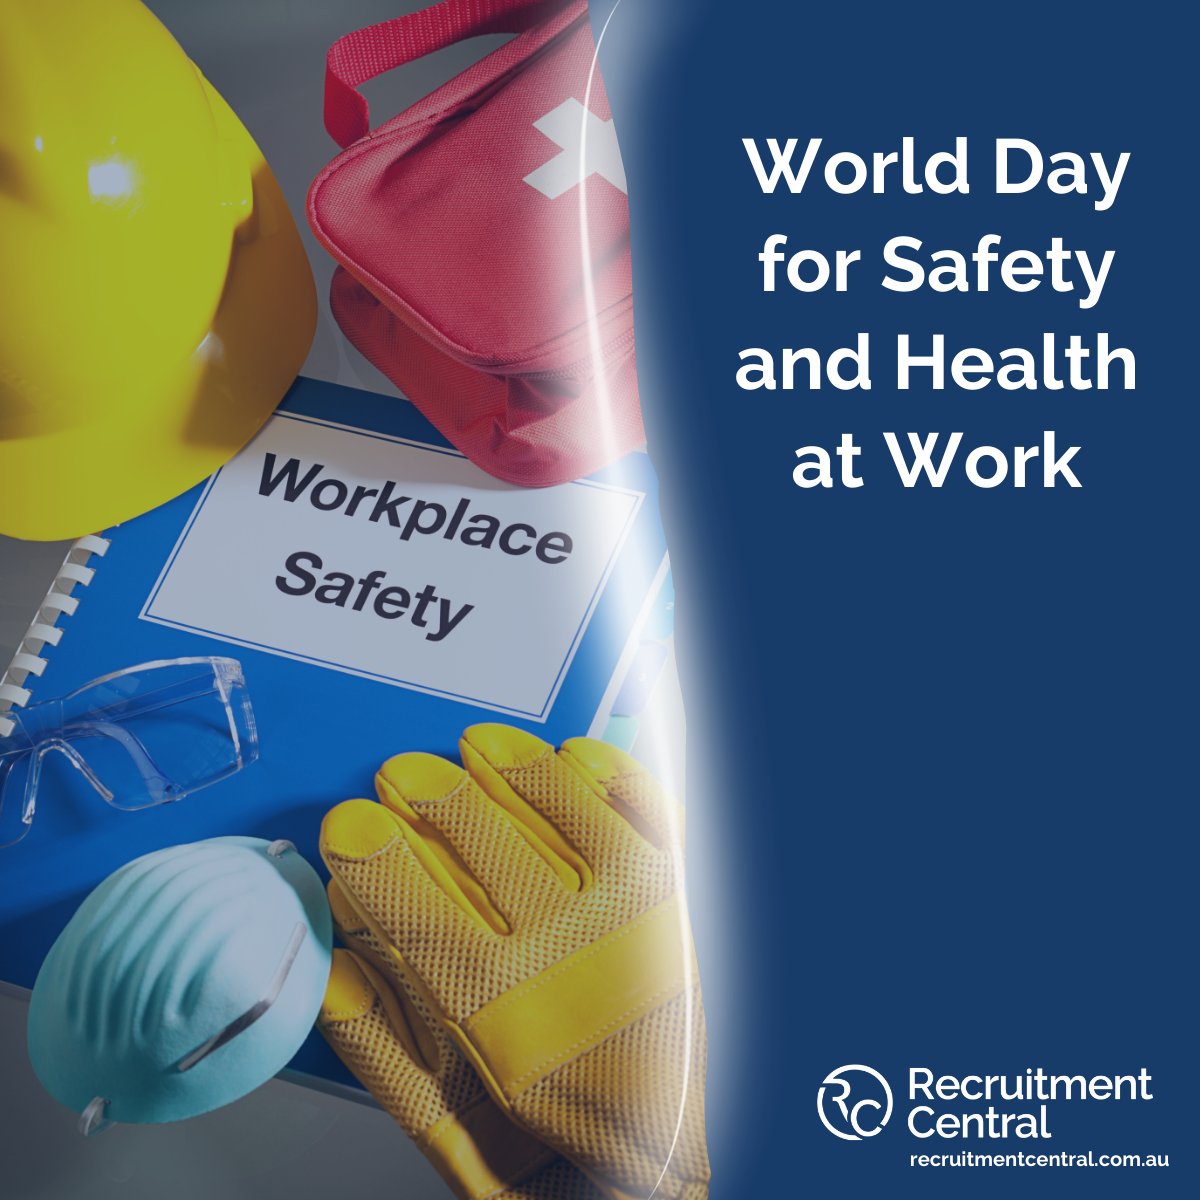 Today is World Day for Safety & Health at Work, taking a moment to honour those who have lost their lives or endured injuries while on the job. Never feel that you can’t speak up about unsafe work practices. 
#SafeWorkDay #HealthAtWork #SafetyFirst #recruitmentcentral